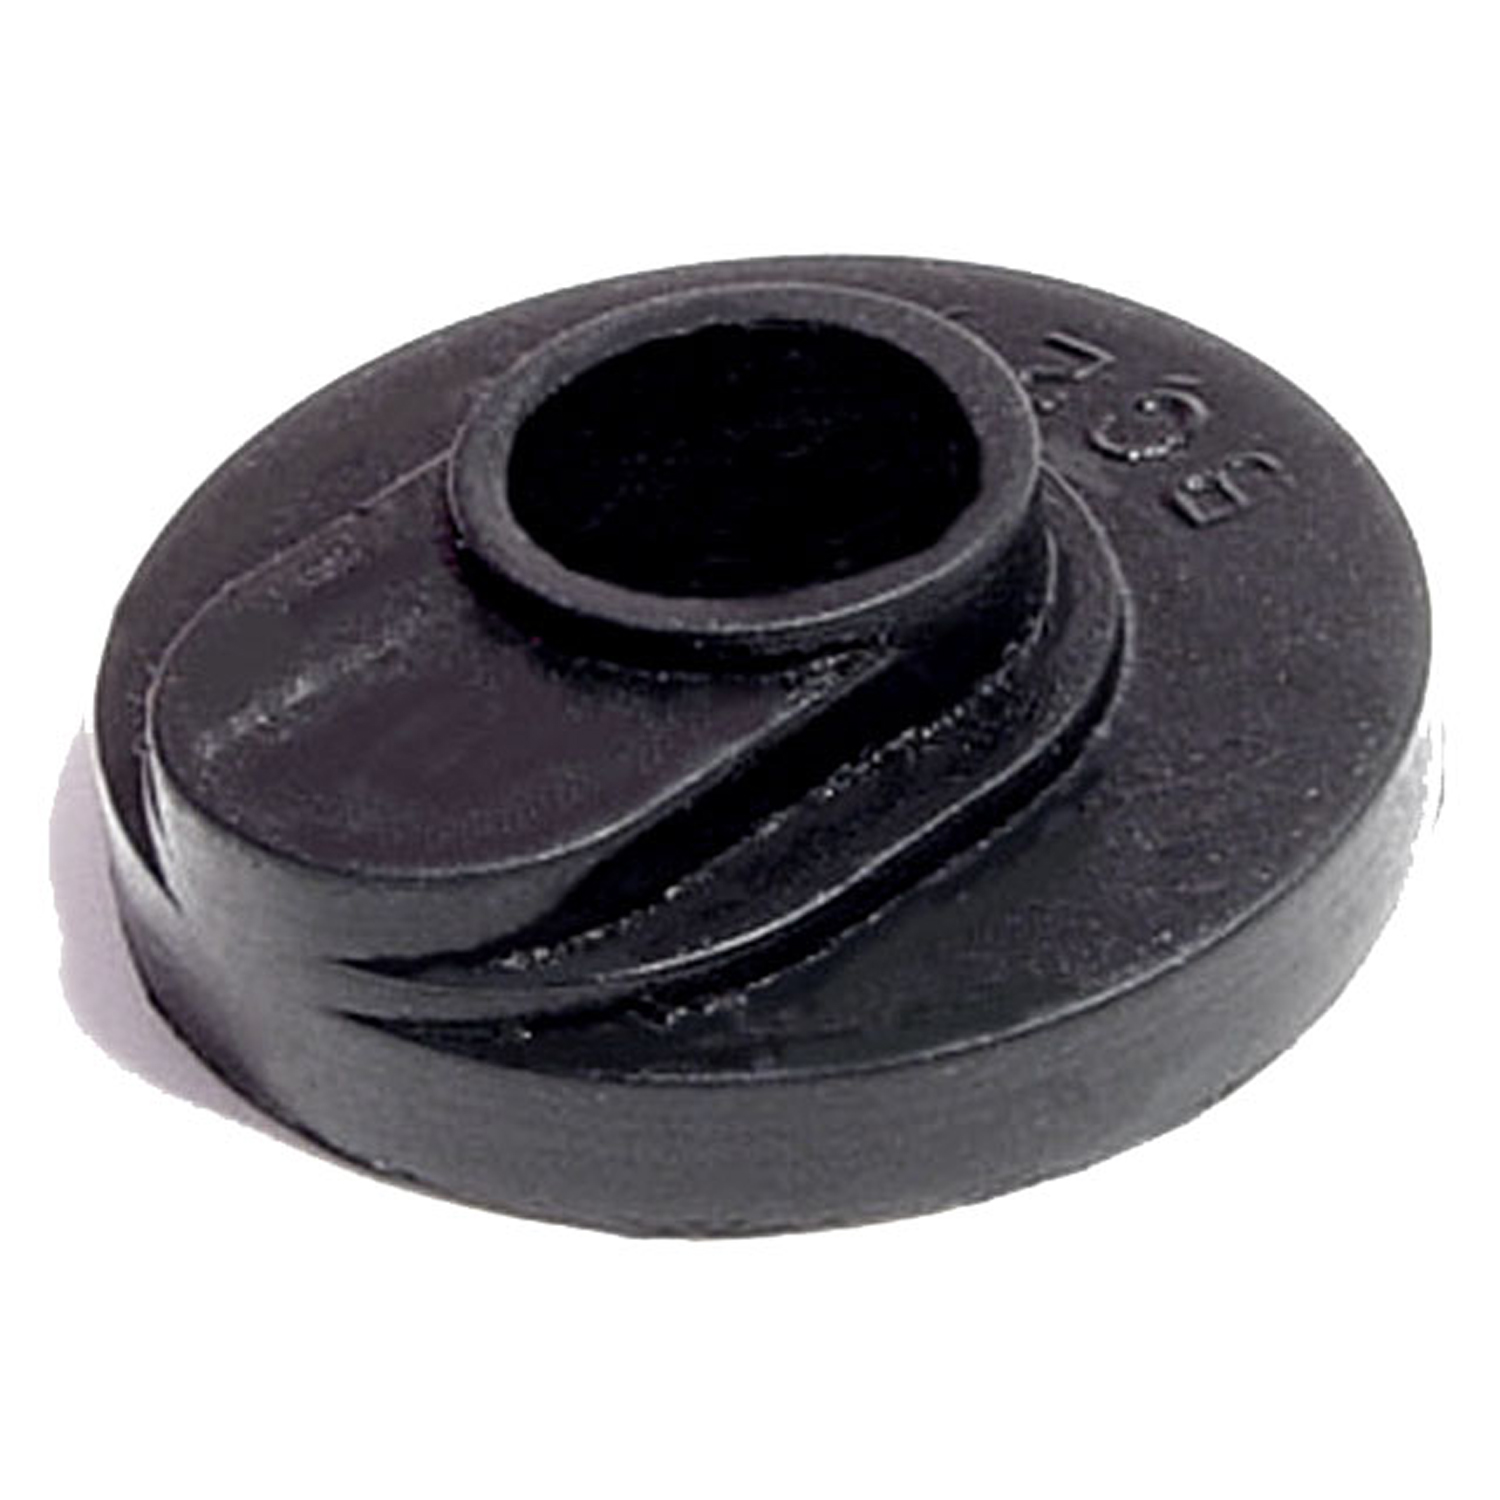 Cowl Vent Seal. Made of molded sponge